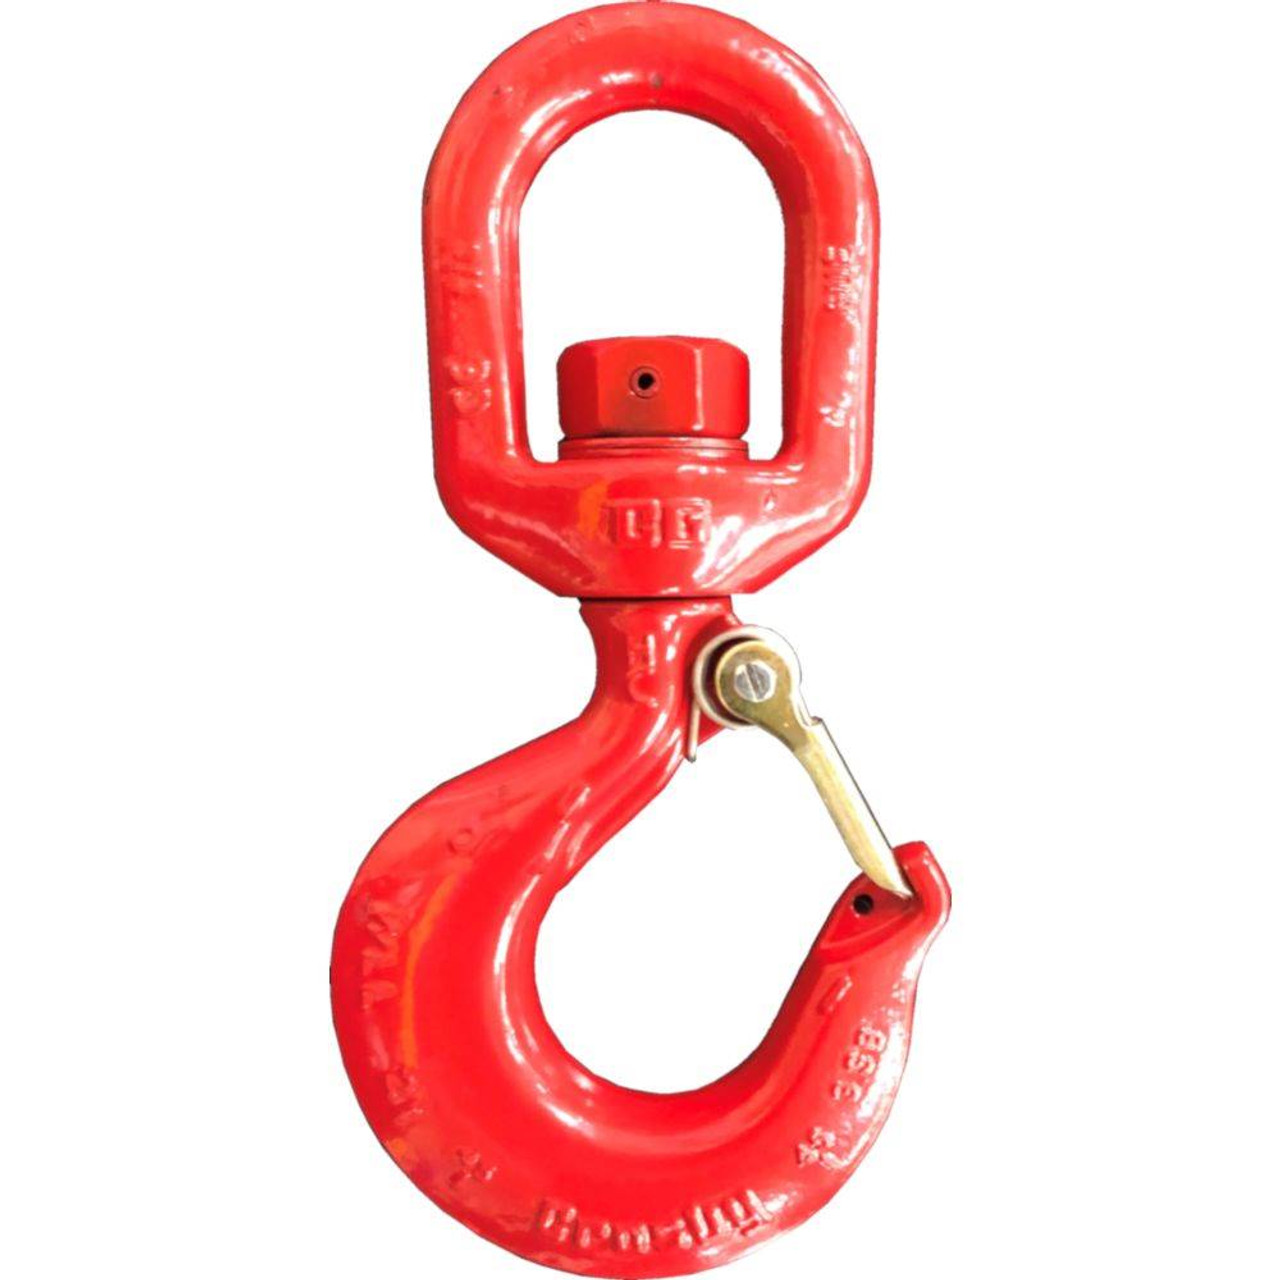 7.5T CROSBY CARBON SWIVEL HOOK L322C HOOK W/ LATCH 1048657 - Bairstow  Lifting Products